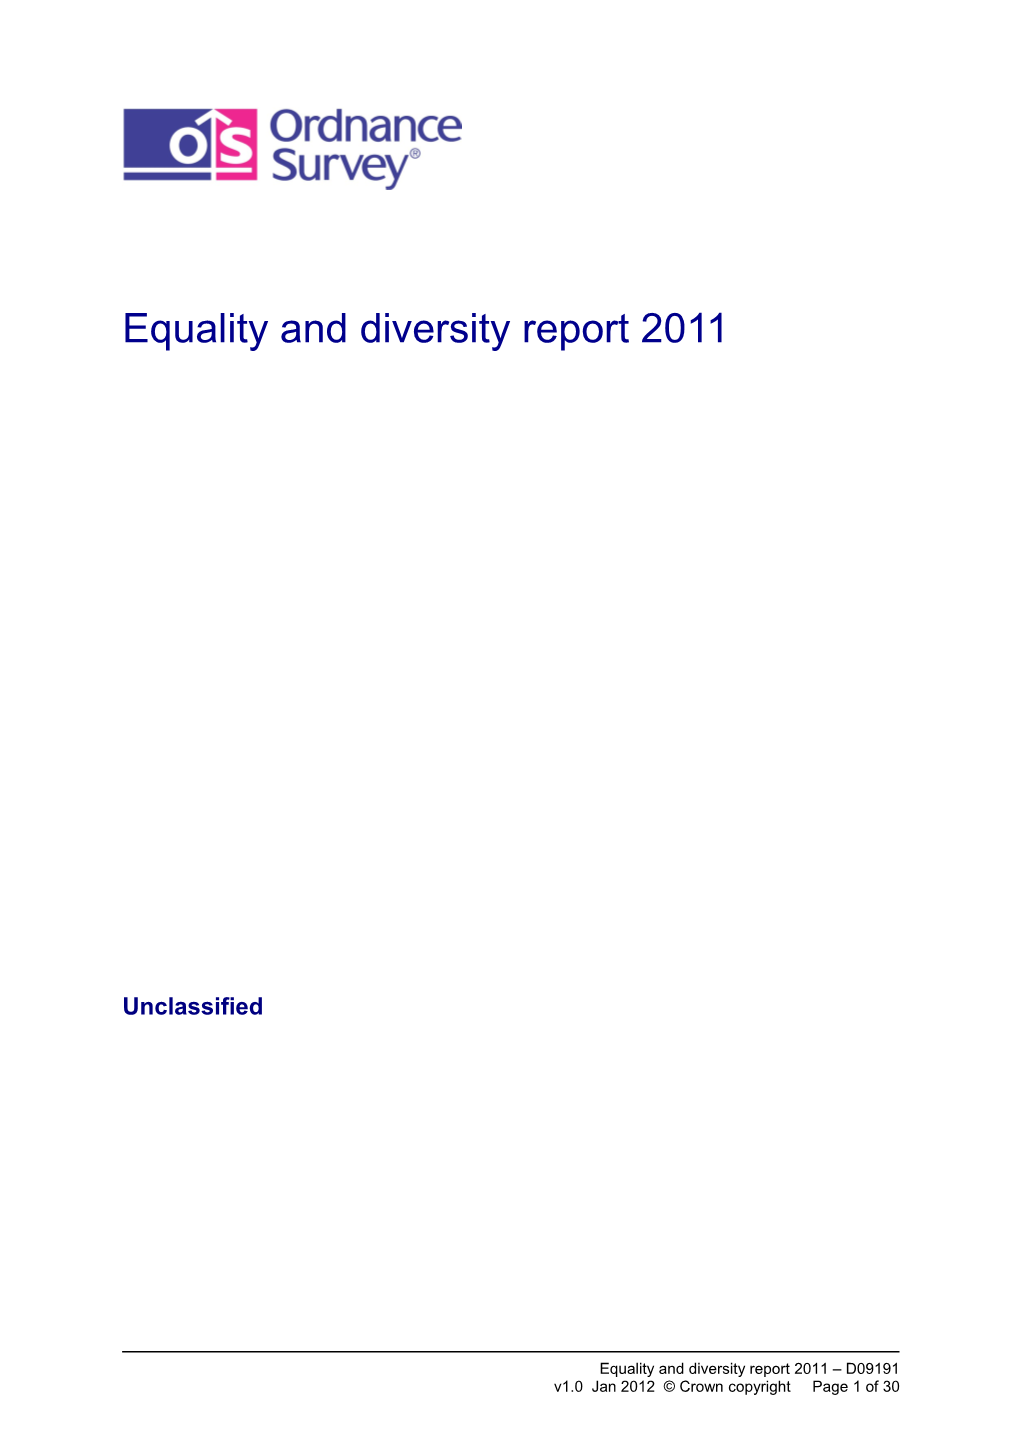 D09191-_Equality And Diversity Report 2011